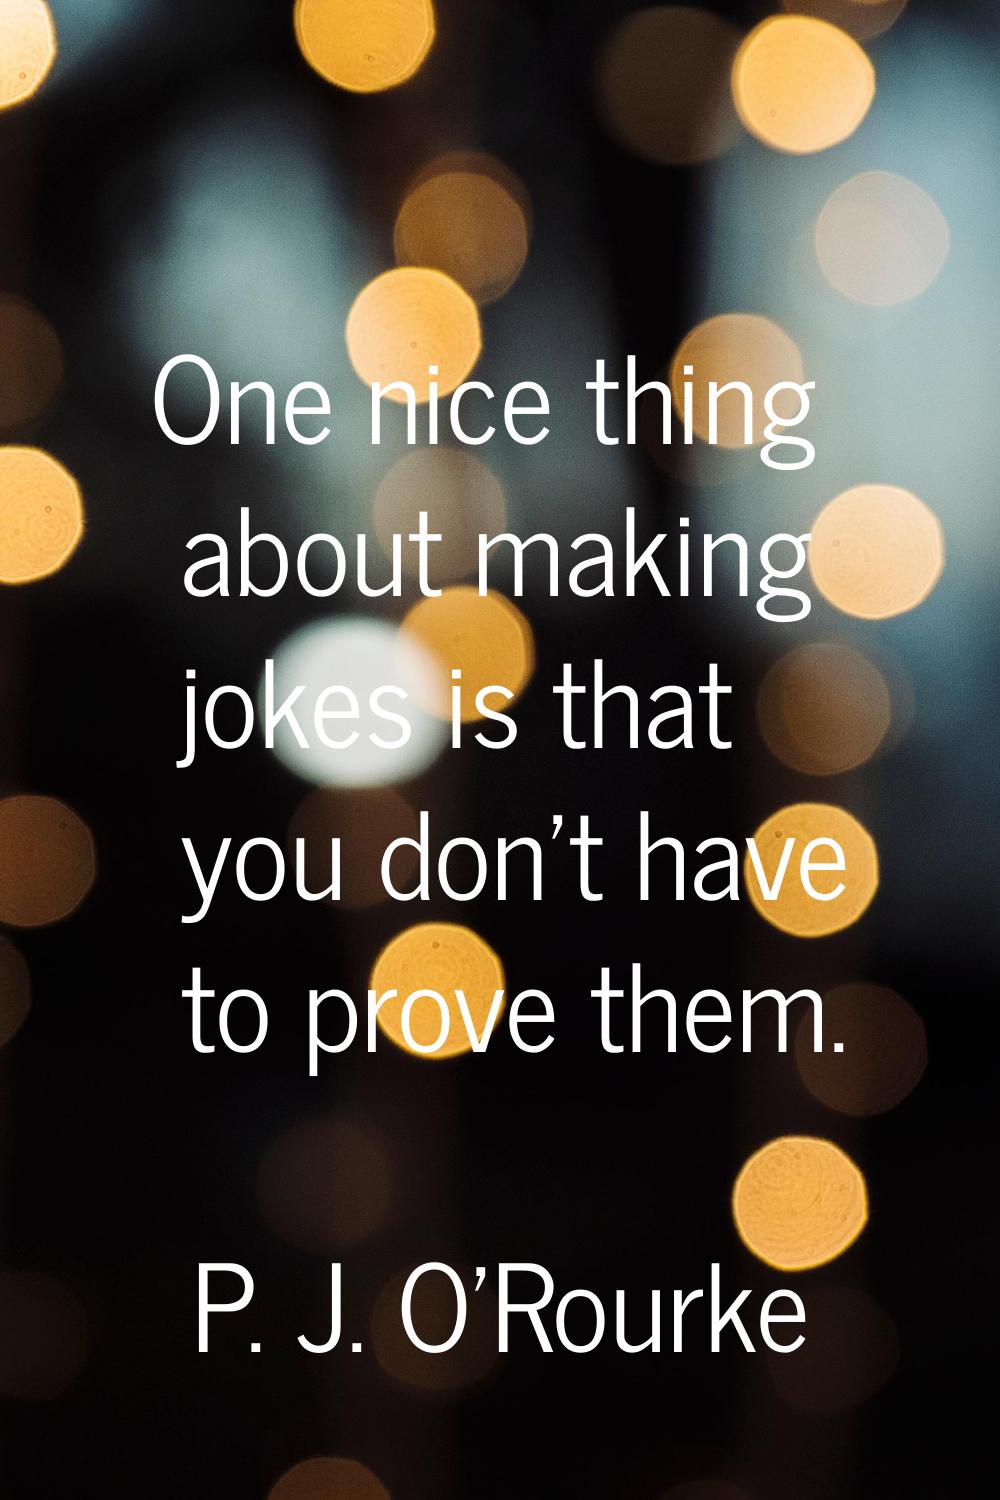 One nice thing about making jokes is that you don't have to prove them.